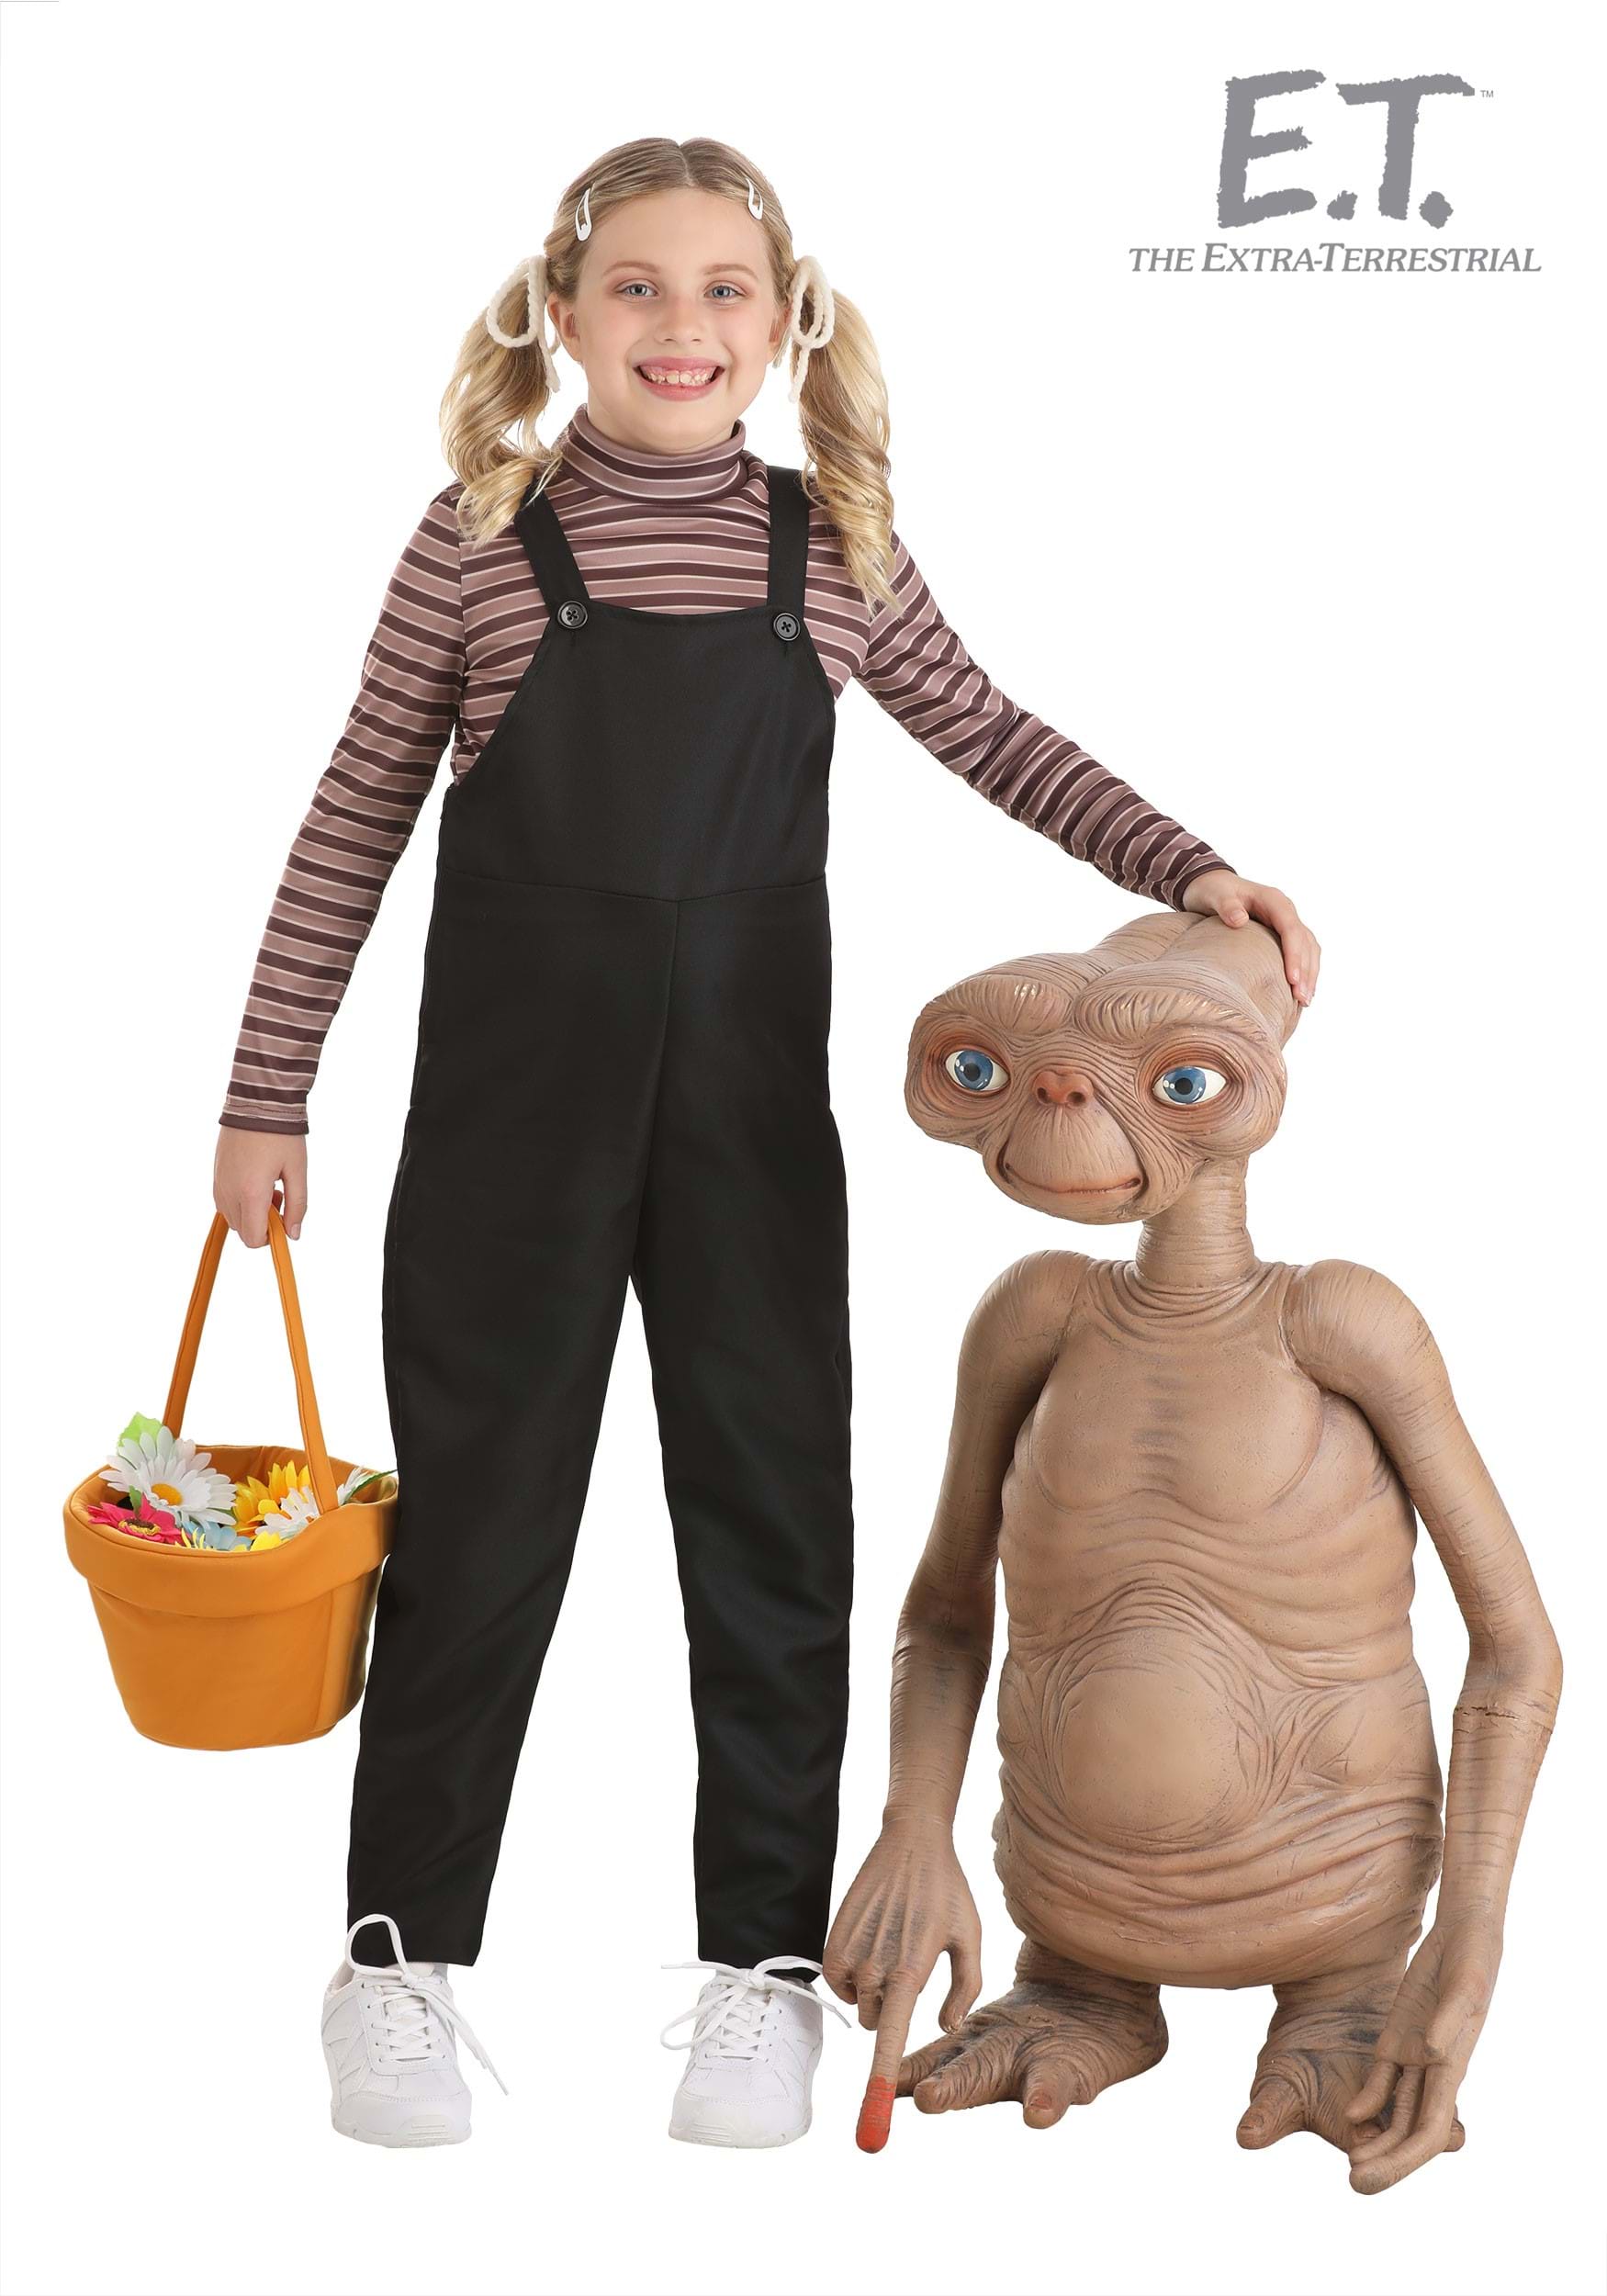 https://images.halloweencostumes.com/products/73893/1-1/kids-e-t-gertie-costume.jpg